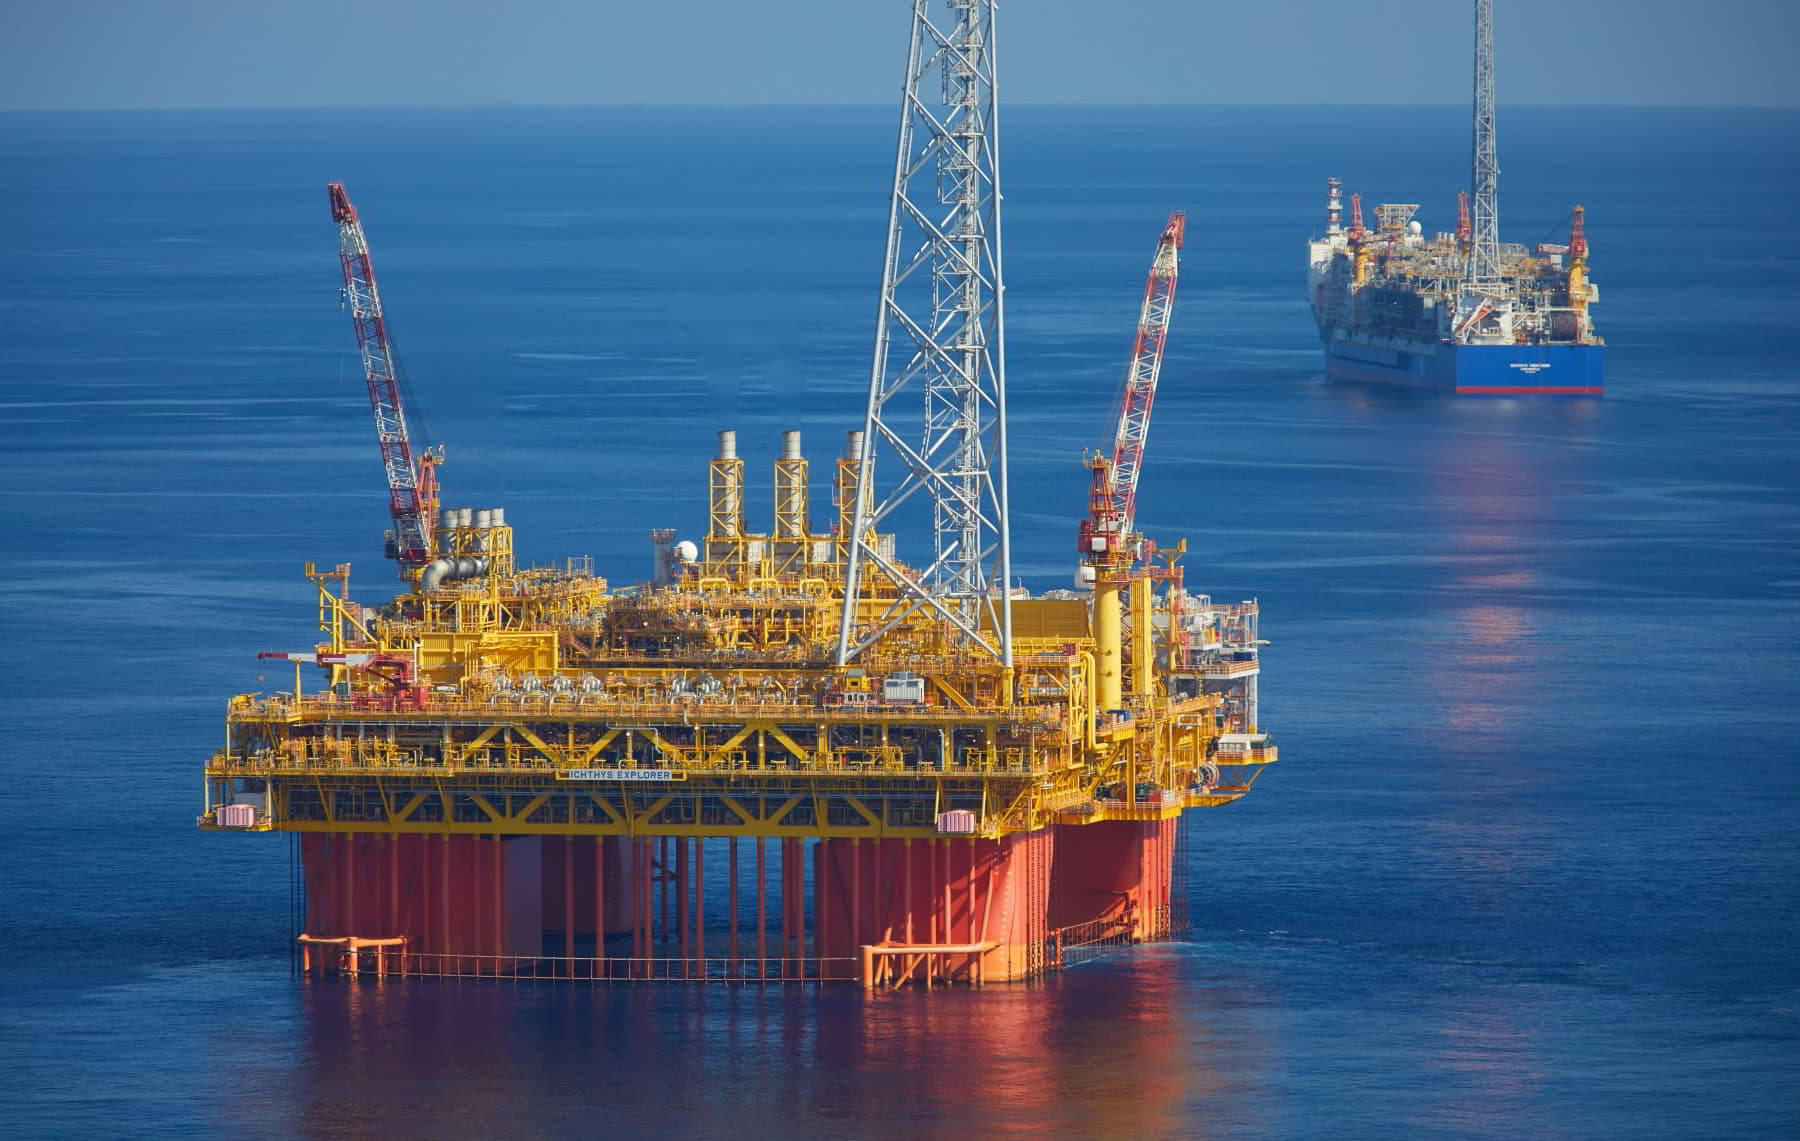 EnerMech lands another gig on Inpex’s Ichthys LNG project